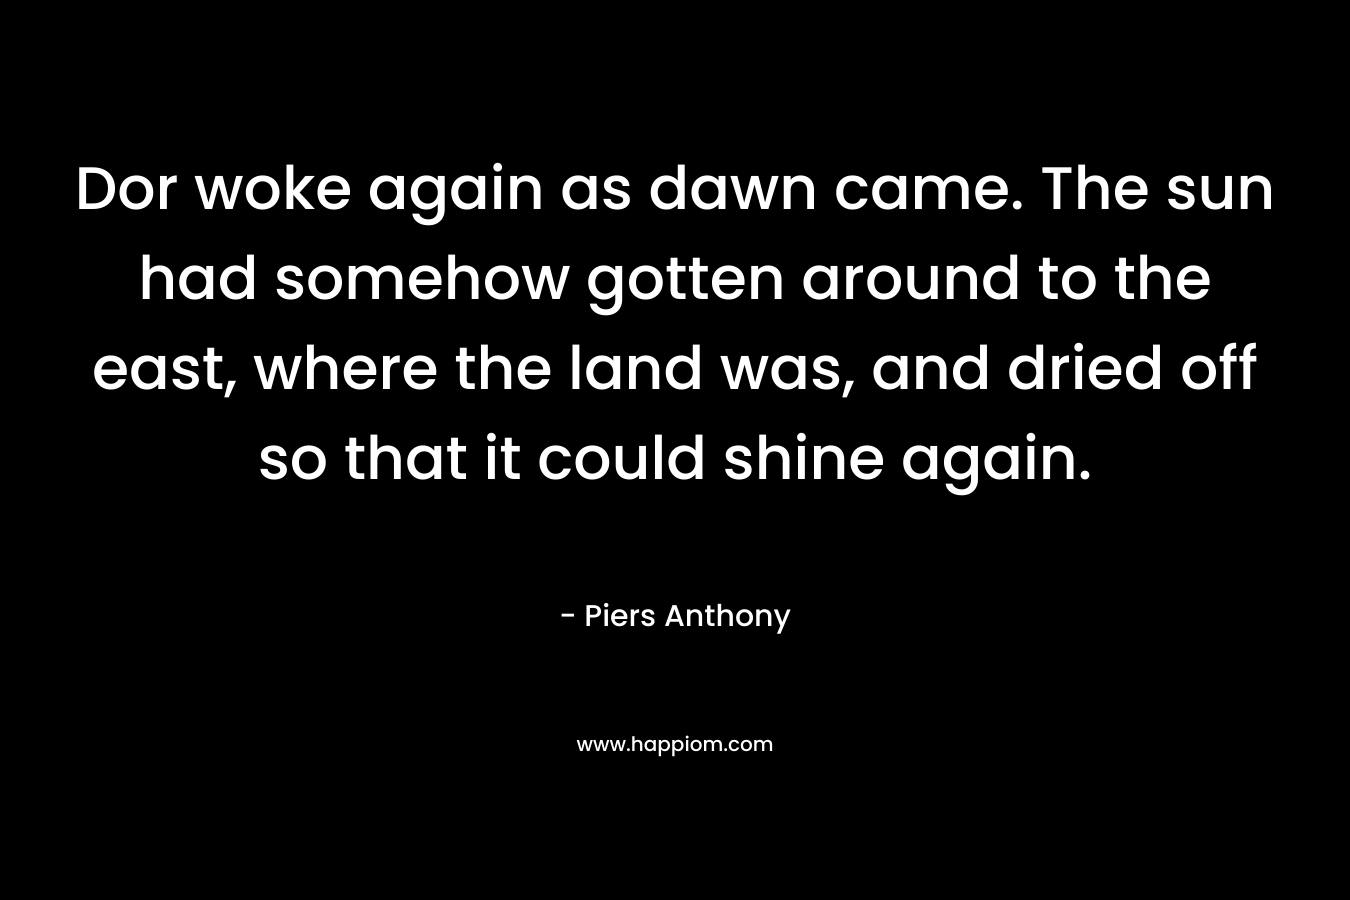 Dor woke again as dawn came. The sun had somehow gotten around to the east, where the land was, and dried off so that it could shine again. – Piers Anthony